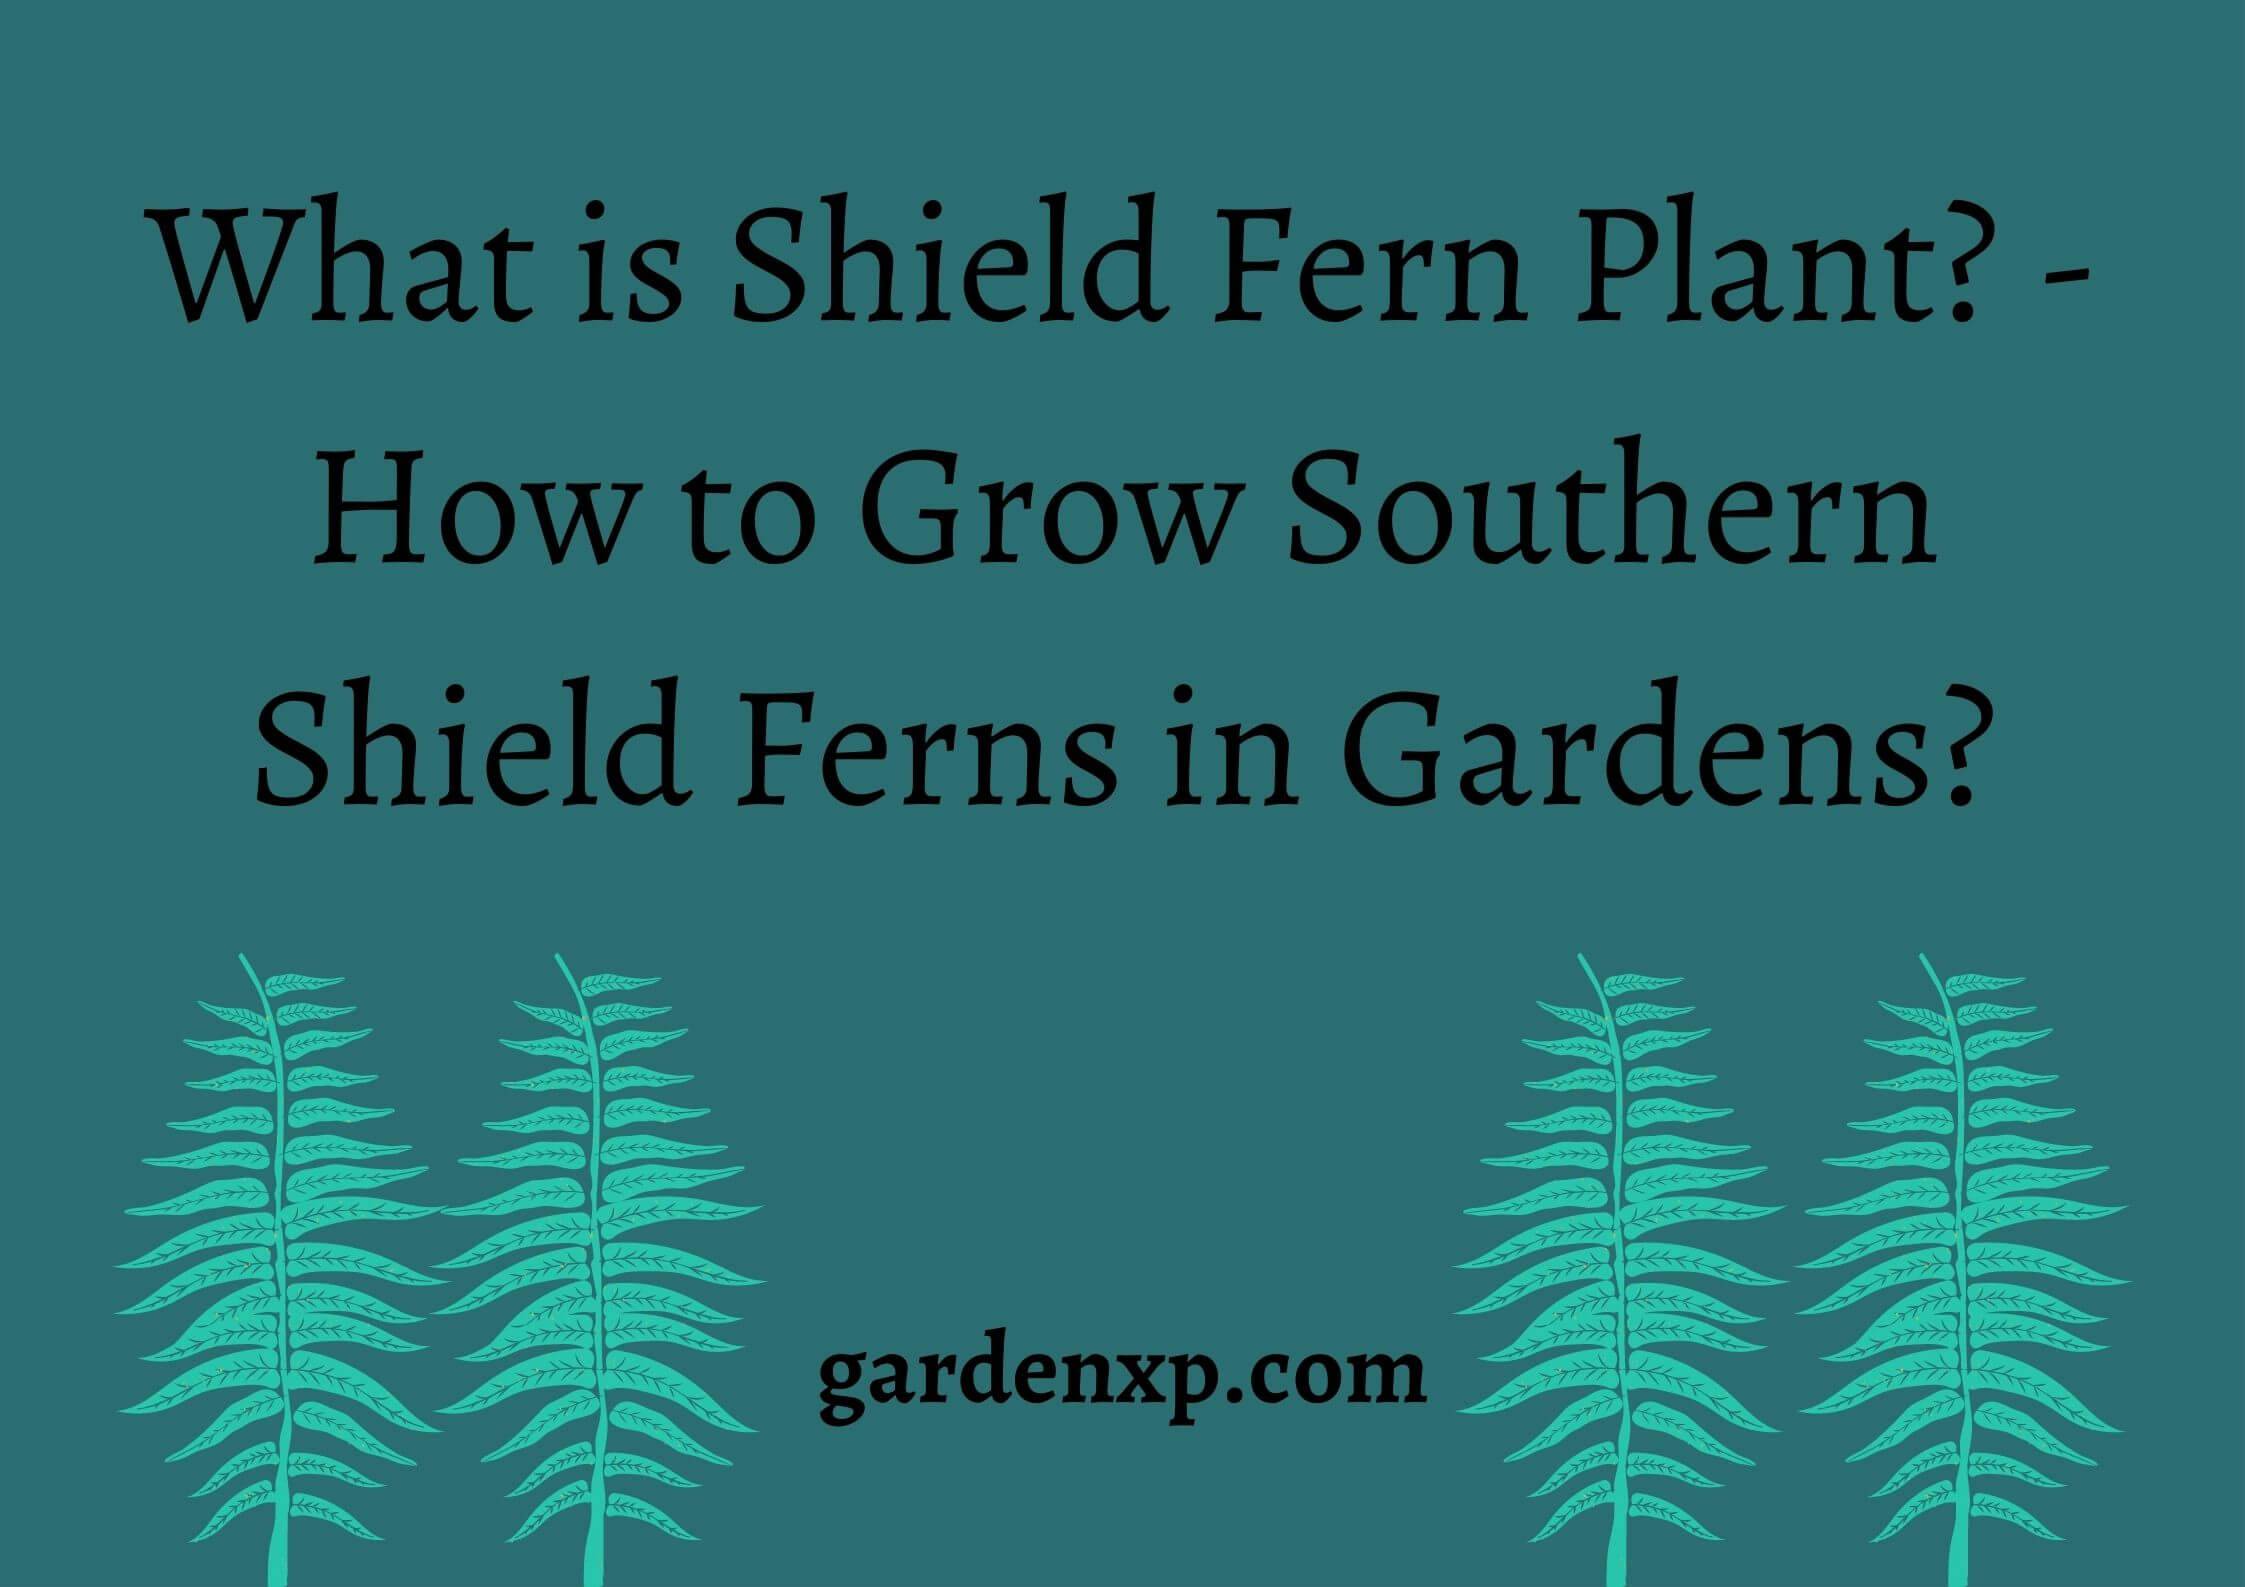 What is Shield Fern Plant? - How to Grow Southern Shield Ferns in Gardens?